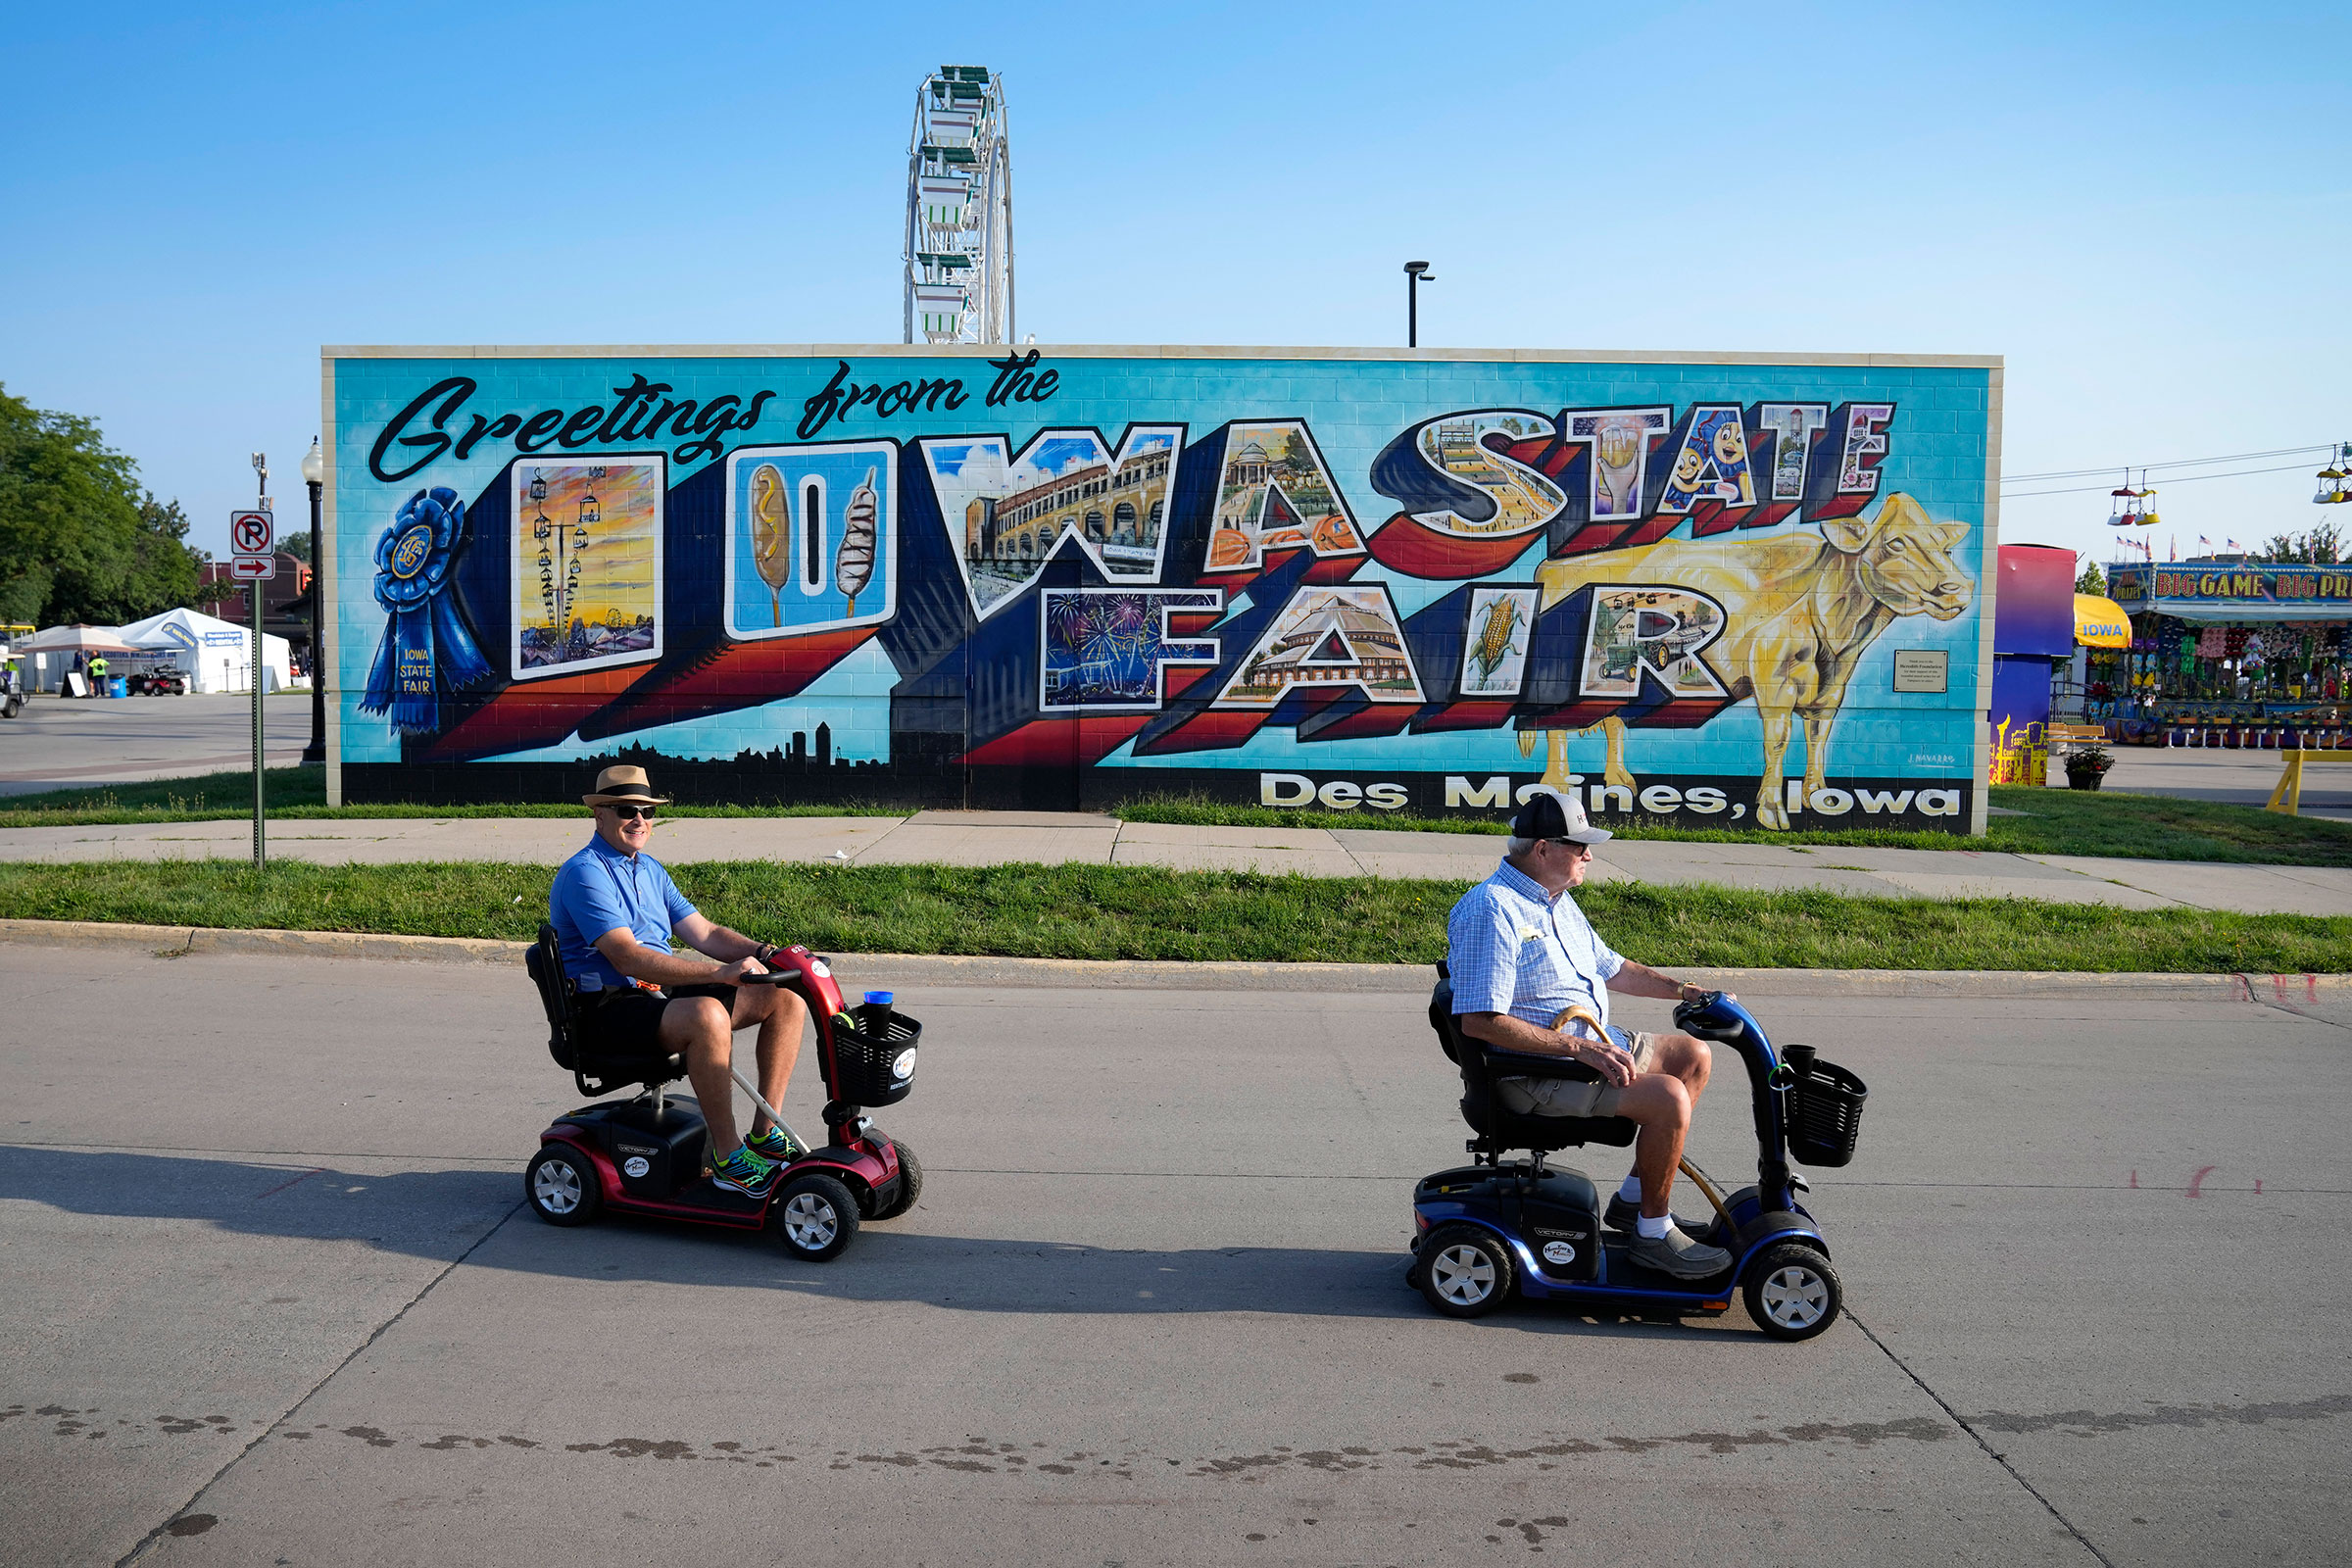 Two men ride scooters across the parking lot in front of Iowa State Fair sign